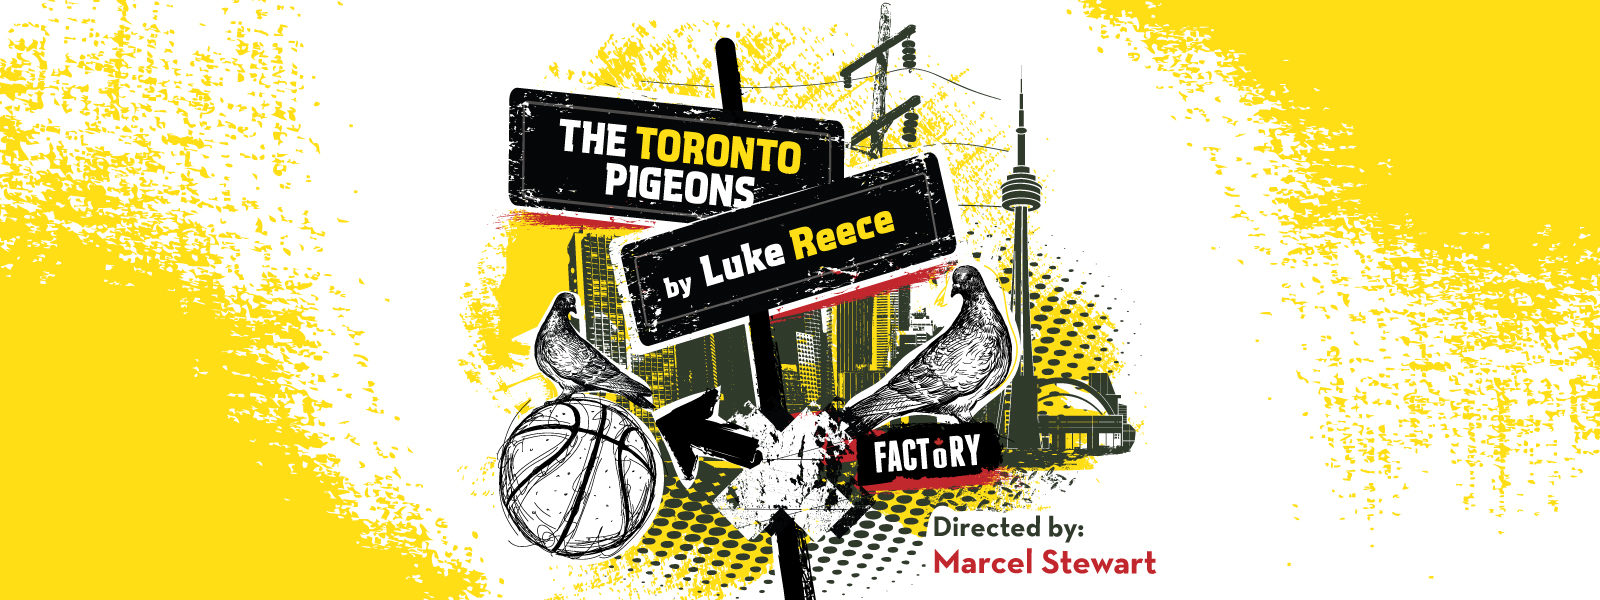 The Toronto Pigeons show poster